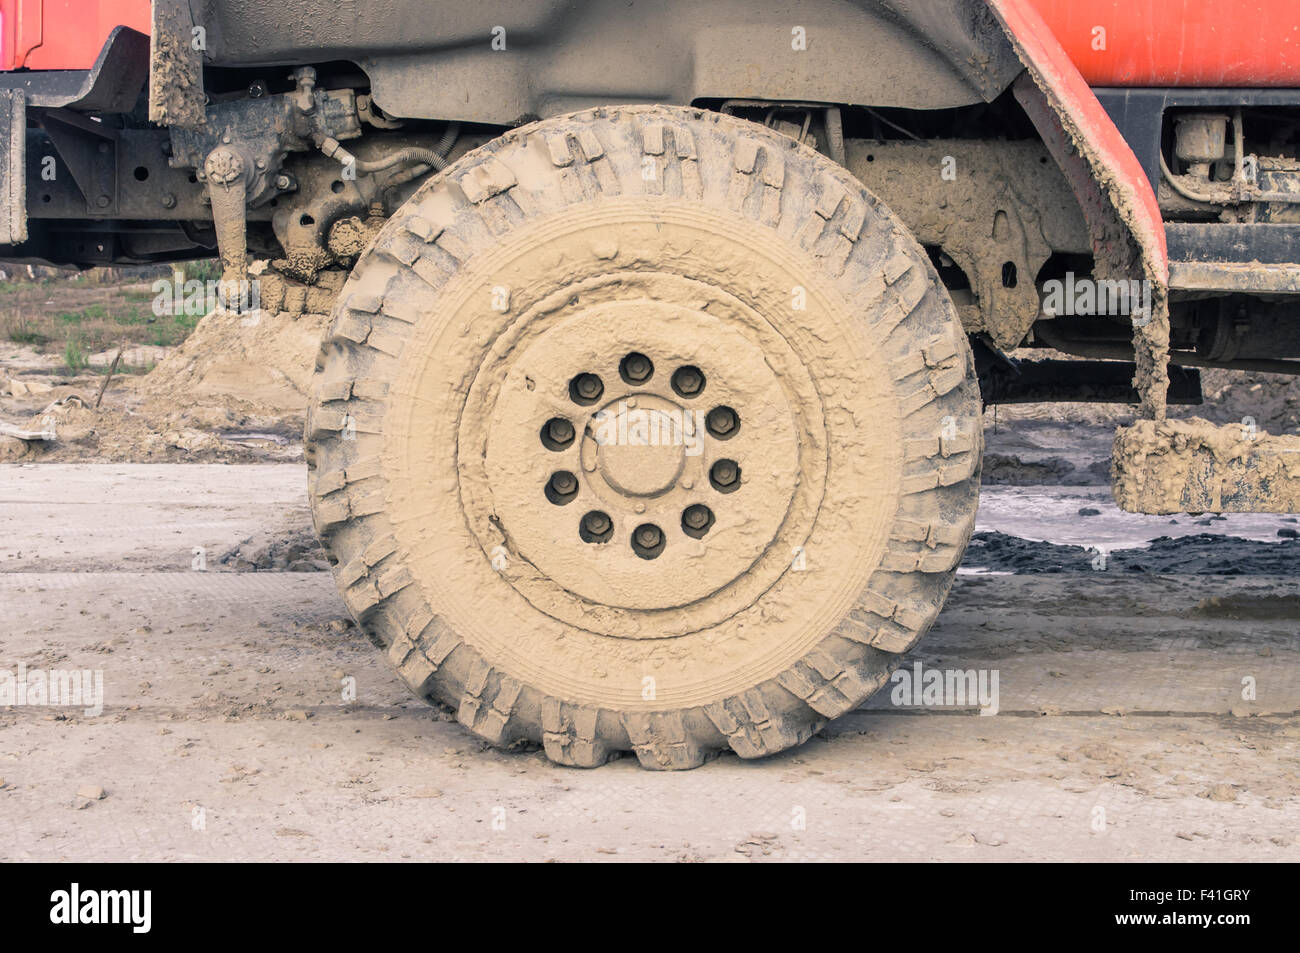 Dump truck wheel in the dirt on a construction site Stock Photo